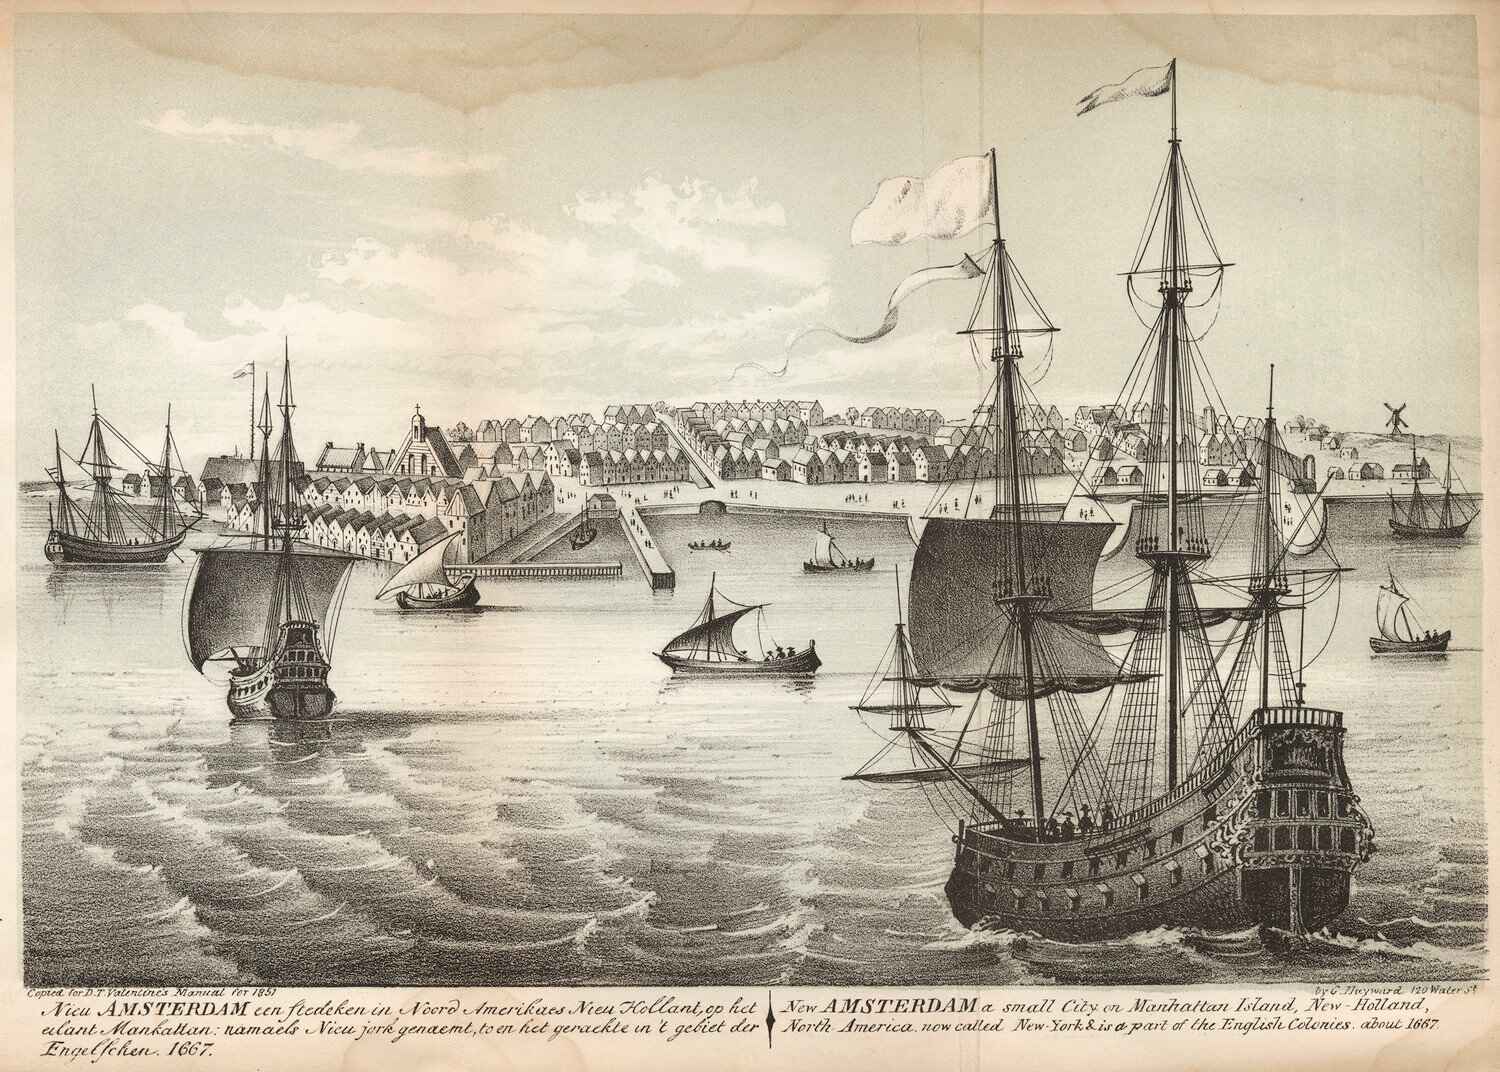 What Did Dutch Trading Companies Promise To Settlers In New Netherland?